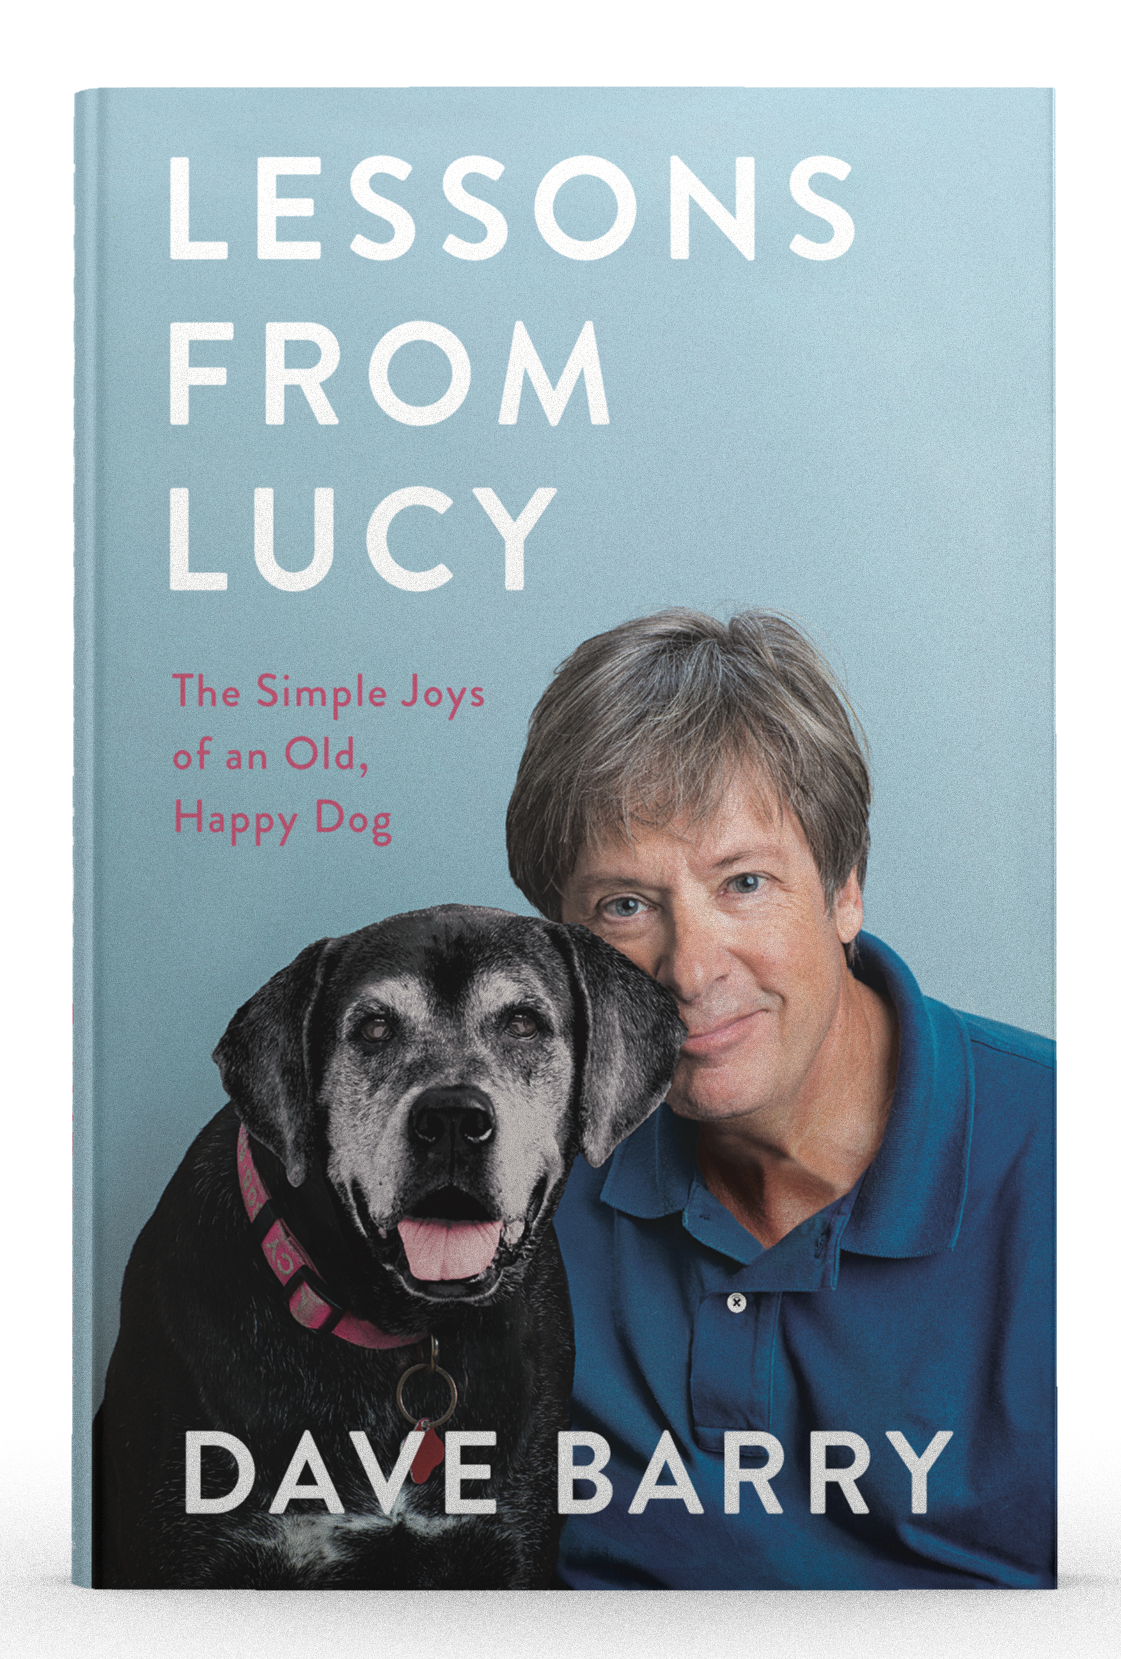 Front cover book shot of Lessons from Lucy by Dave Barry